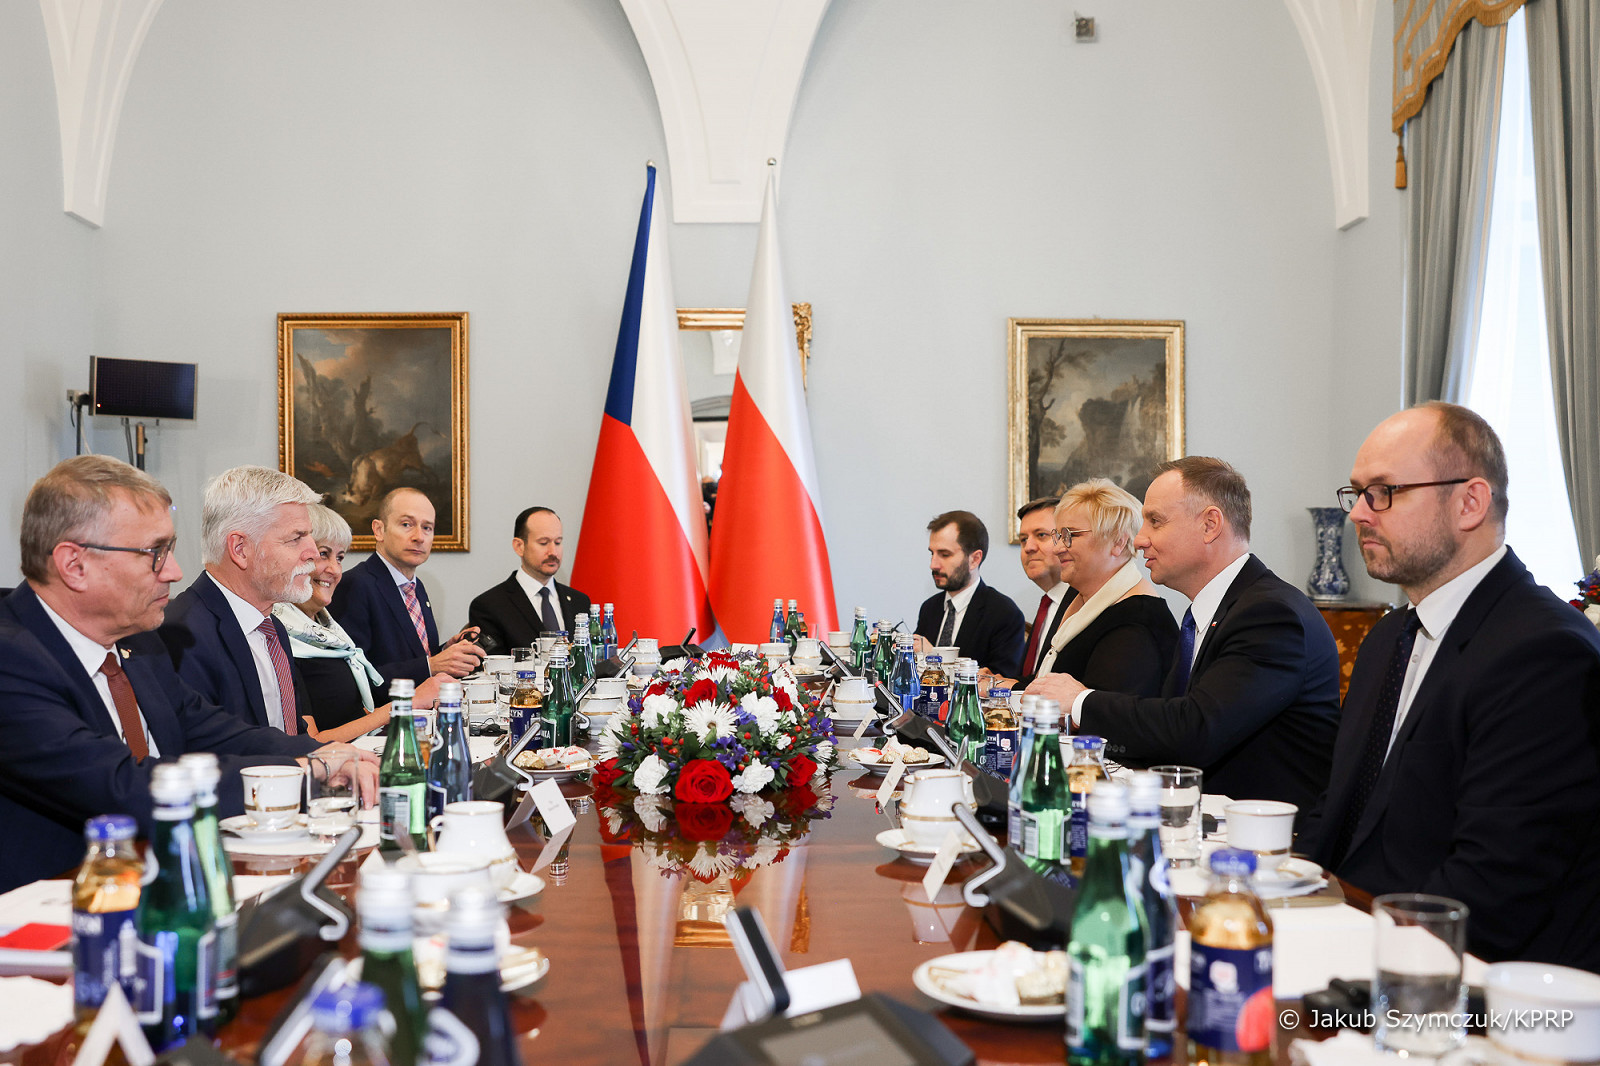 Czechia and Poland should do more together, it is in their mutual interest